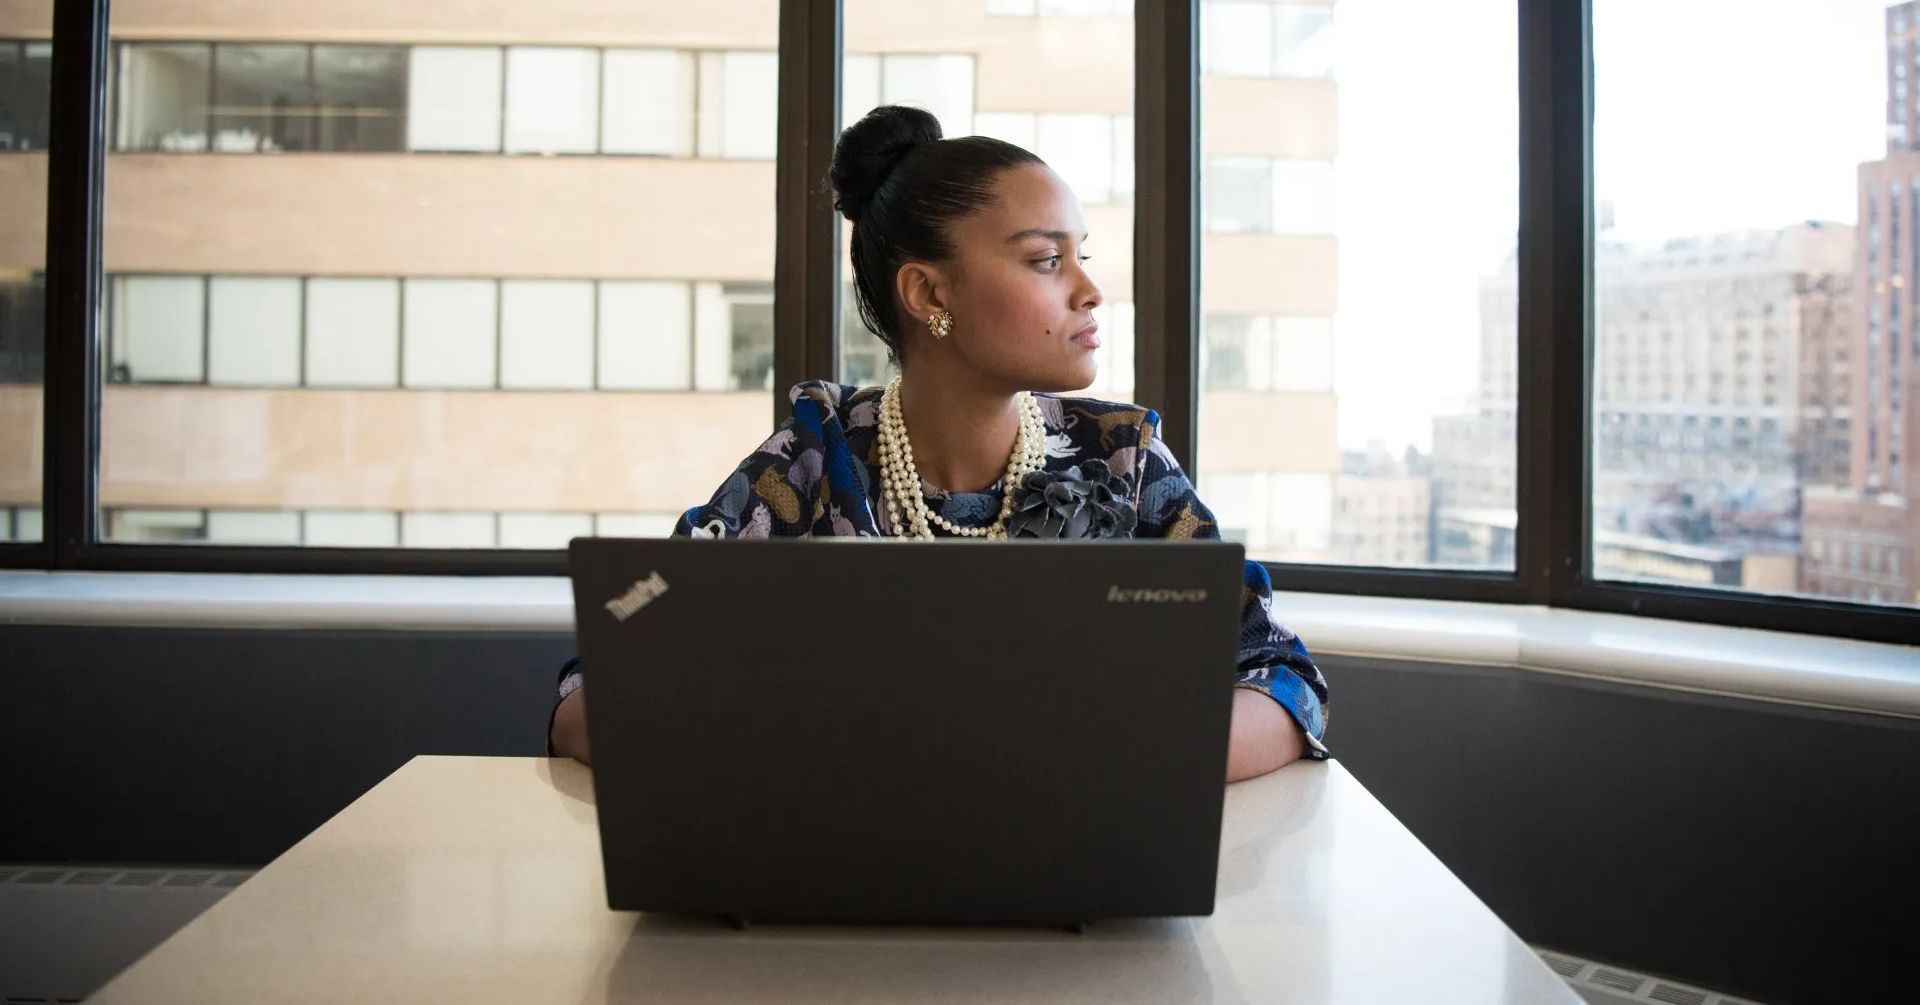 This is an image illustrating the switch from Quickbooks to NetSuite. It features a woman working on a laptop in an office.